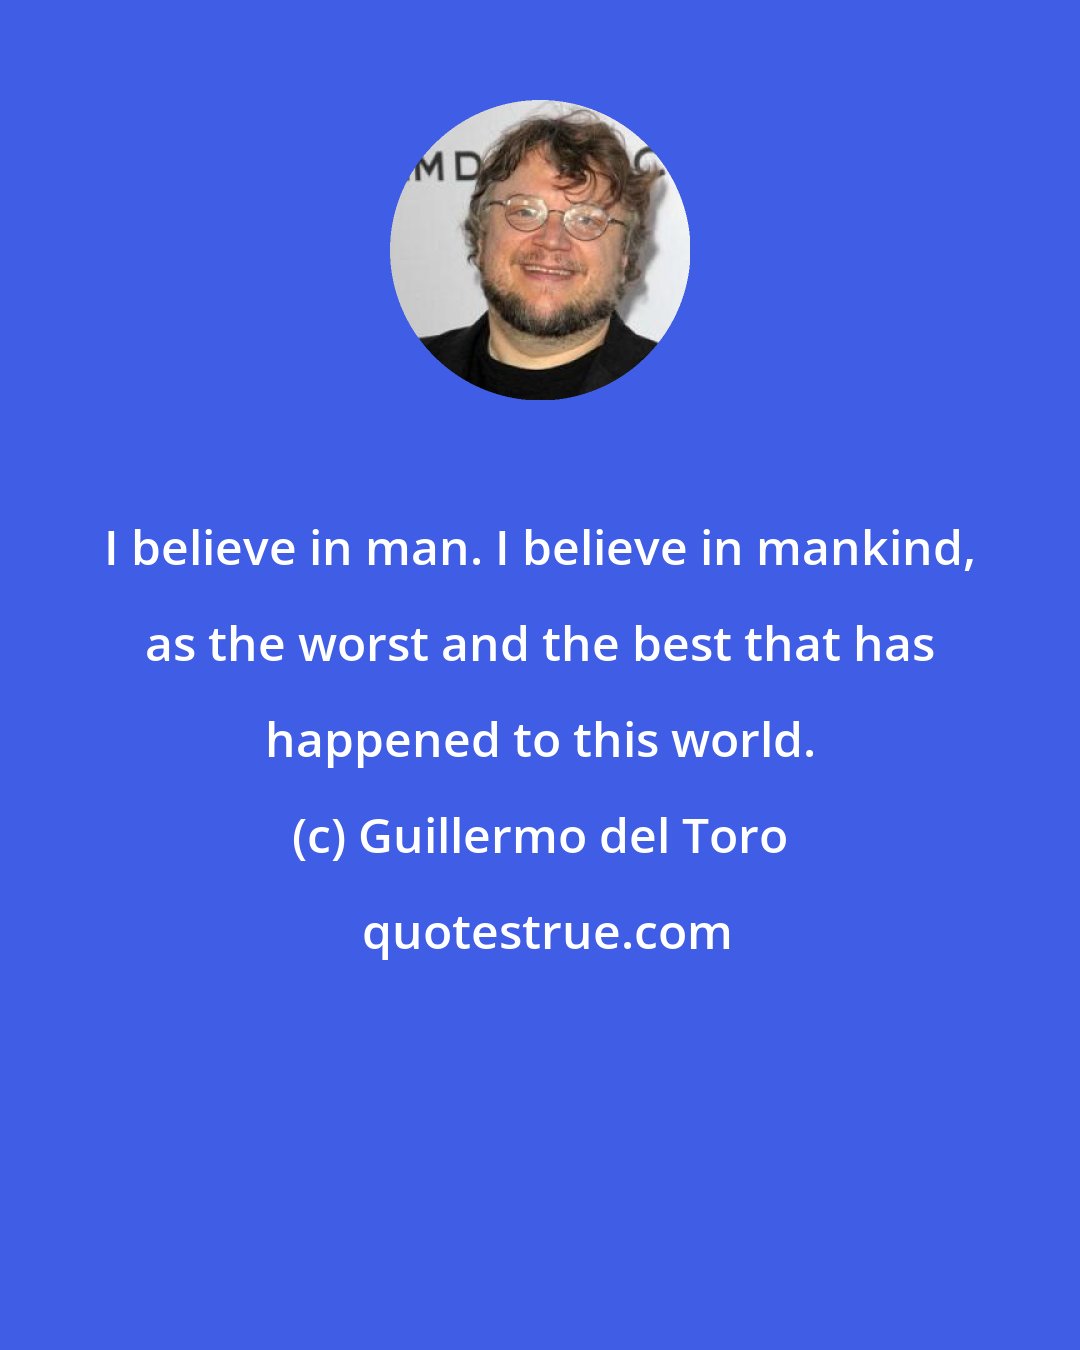 Guillermo del Toro: I believe in man. I believe in mankind, as the worst and the best that has happened to this world.